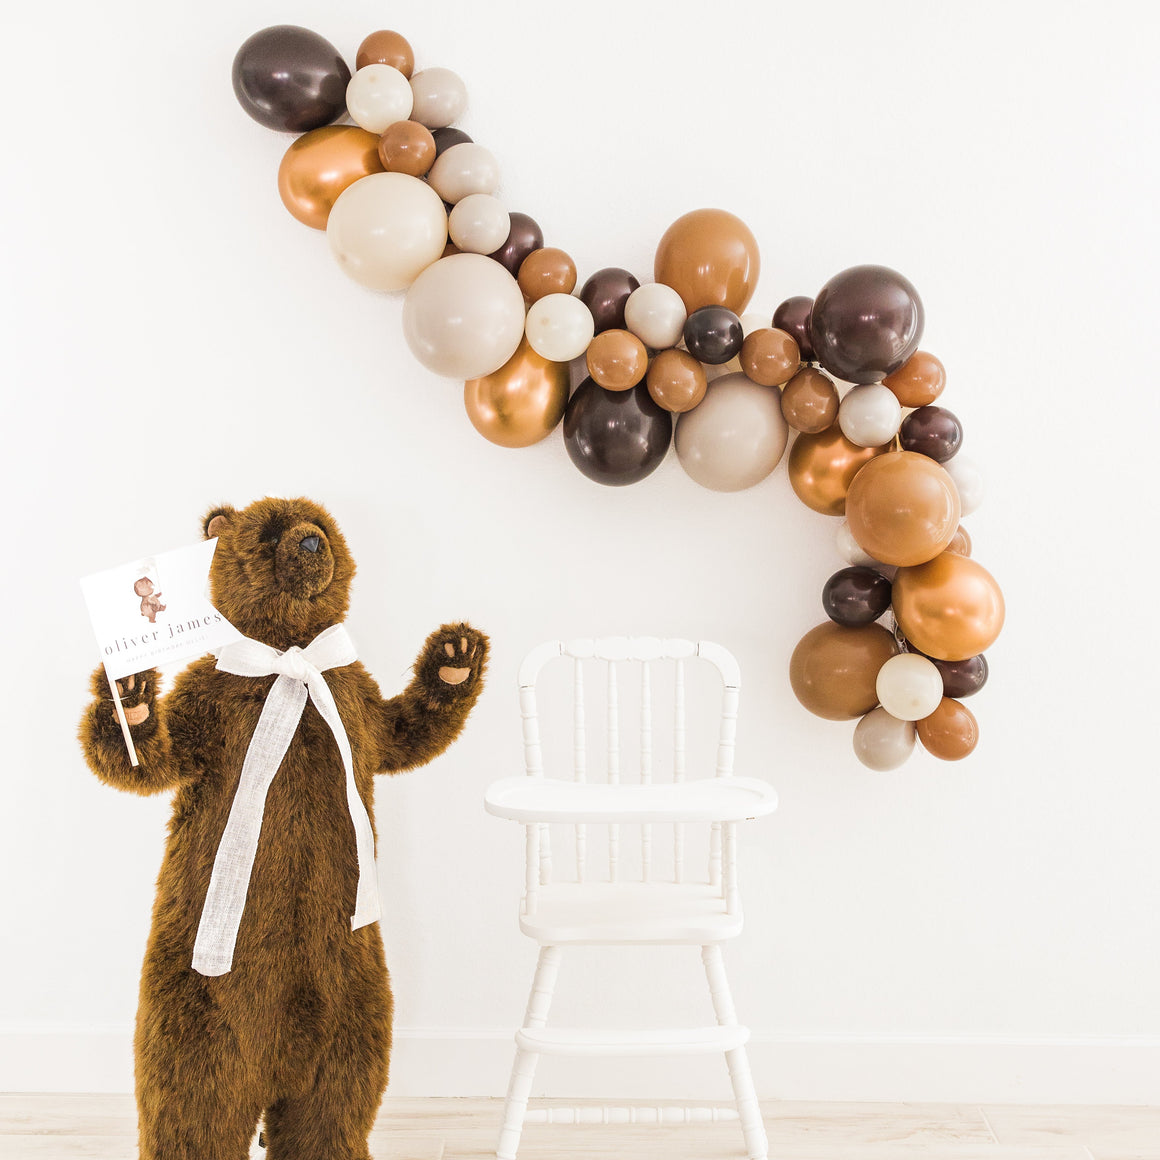 A life size bear is holding a white banner and standing next to a white chair. Above the chair is a balloon garland with the colors brown, mocha, tan, double stuffed tan, and copper. 